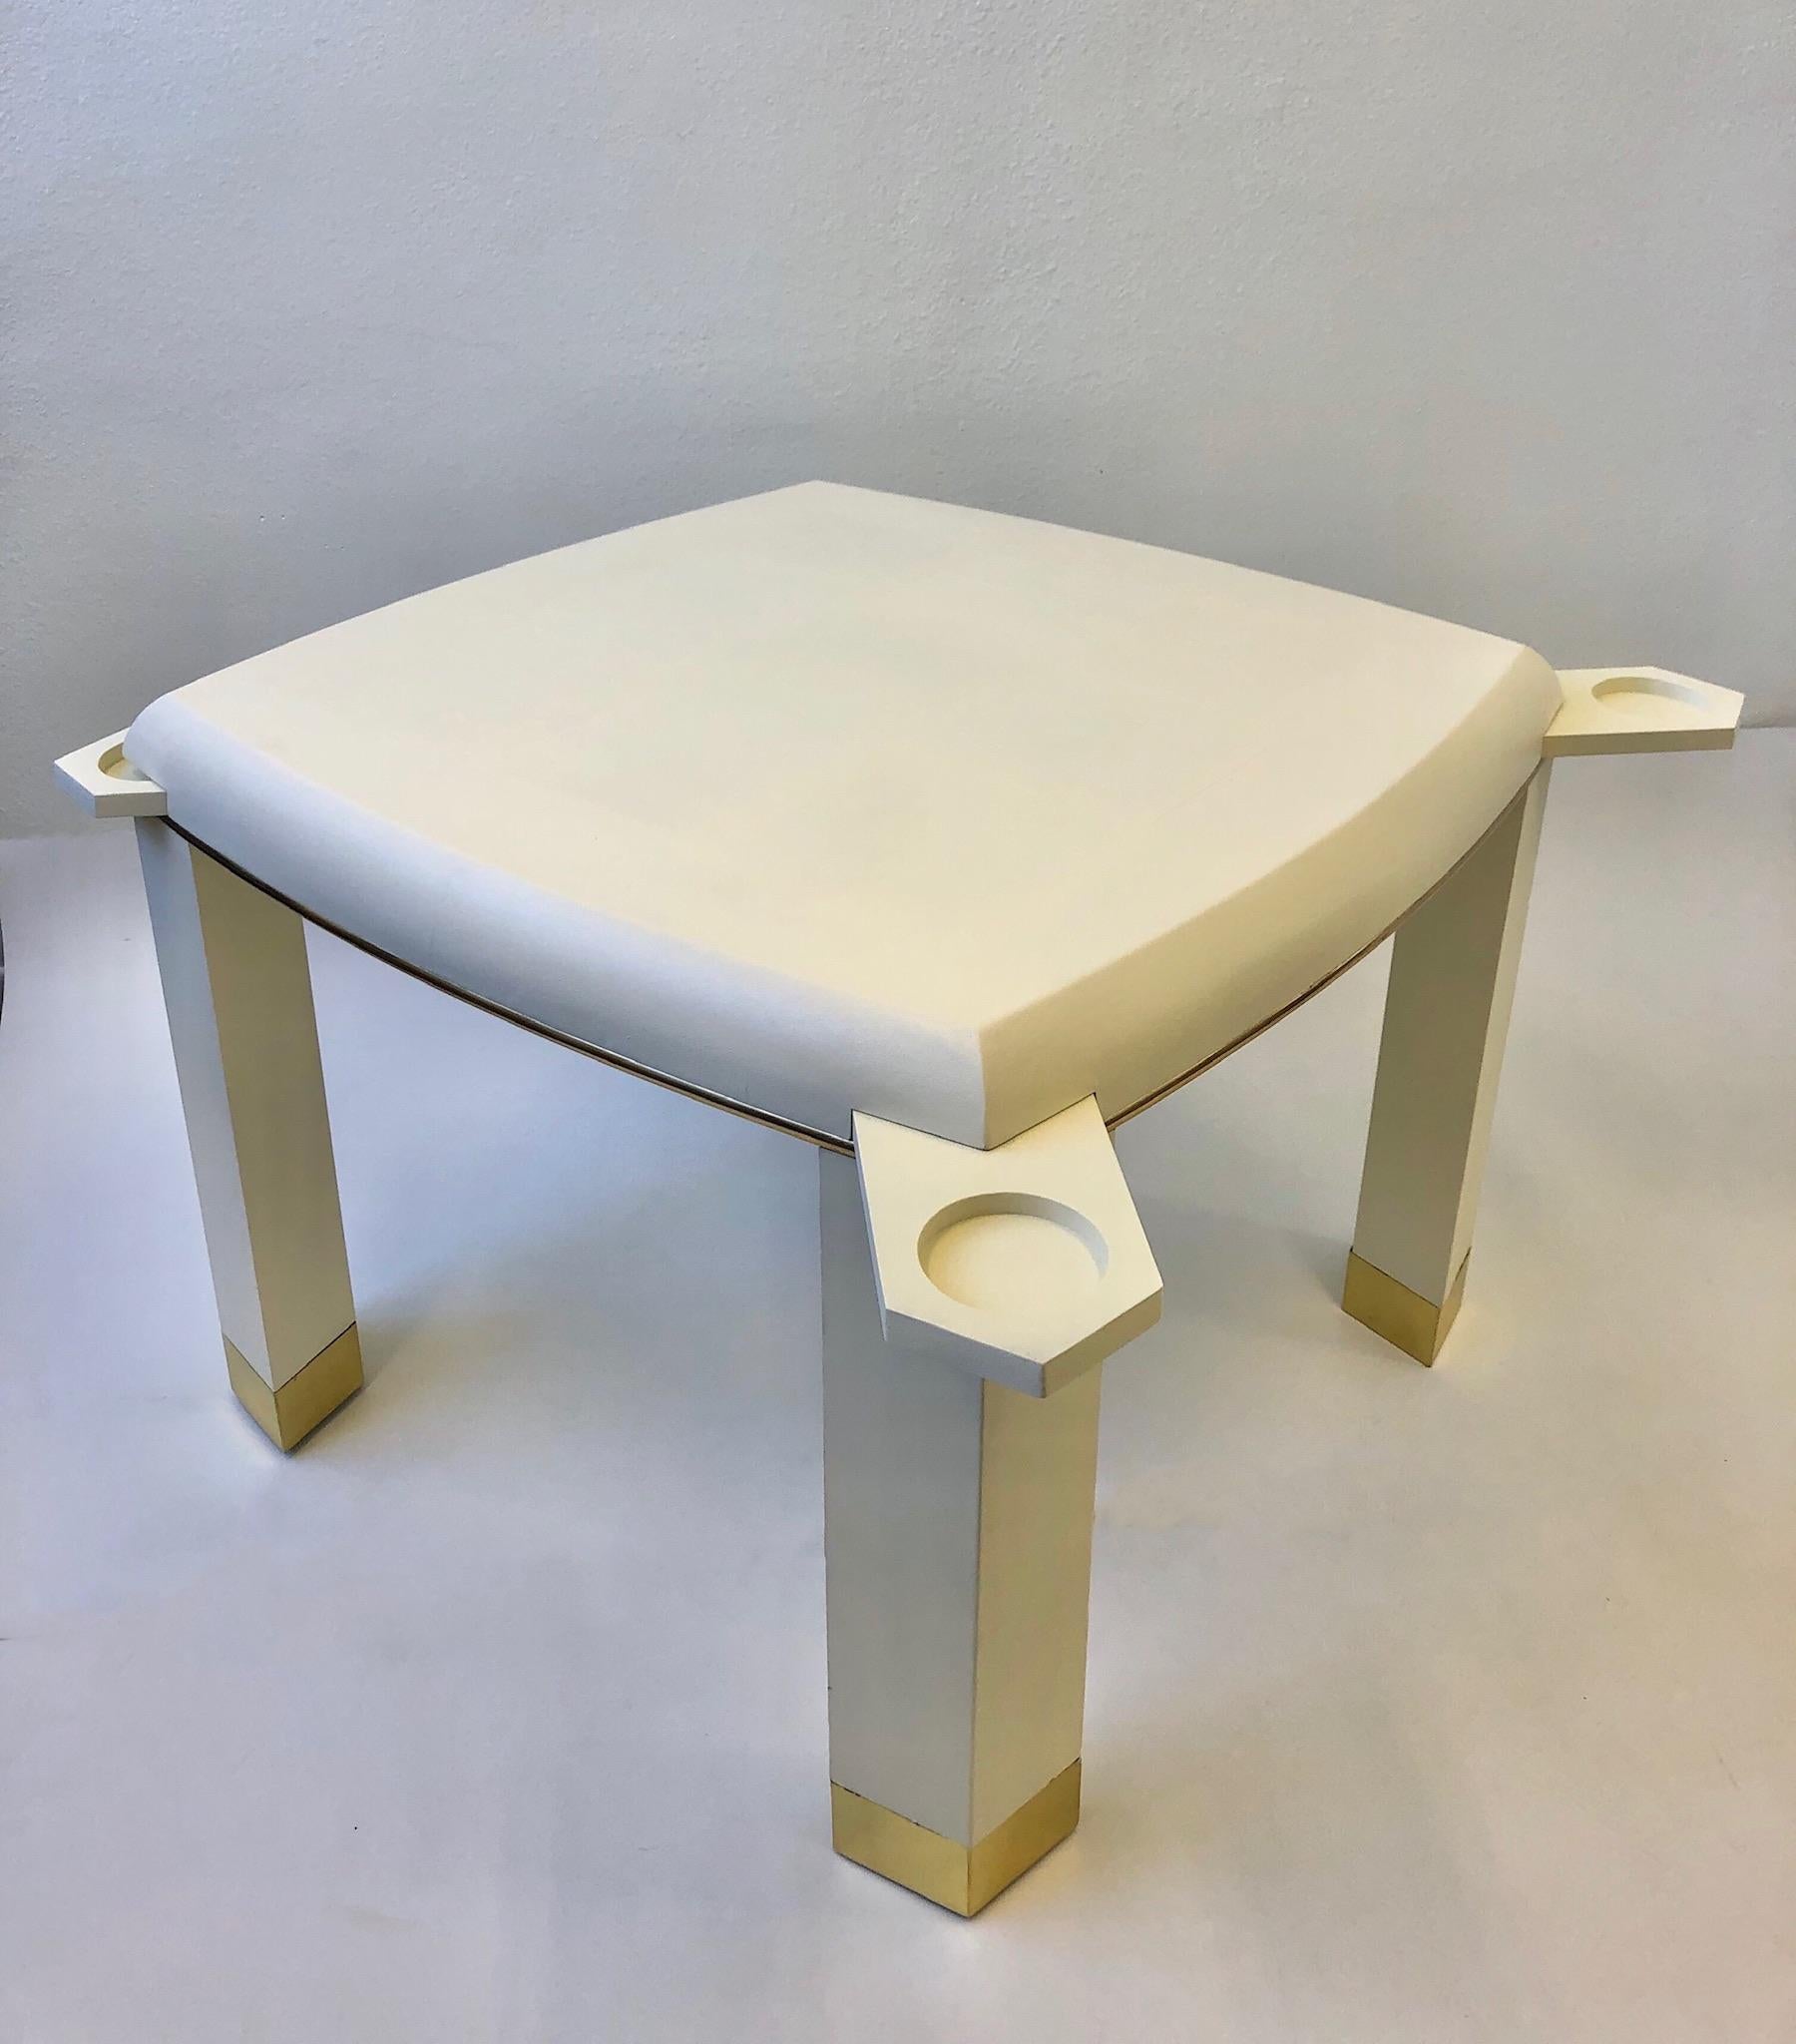 A glamorous game table with hidden drink or ashtray holder in the style of renowned designer Karl Springer in the 1980s. The table is constructed of wood that’s wrapped with off white snake embossed leather and polish brass detail. The table has a